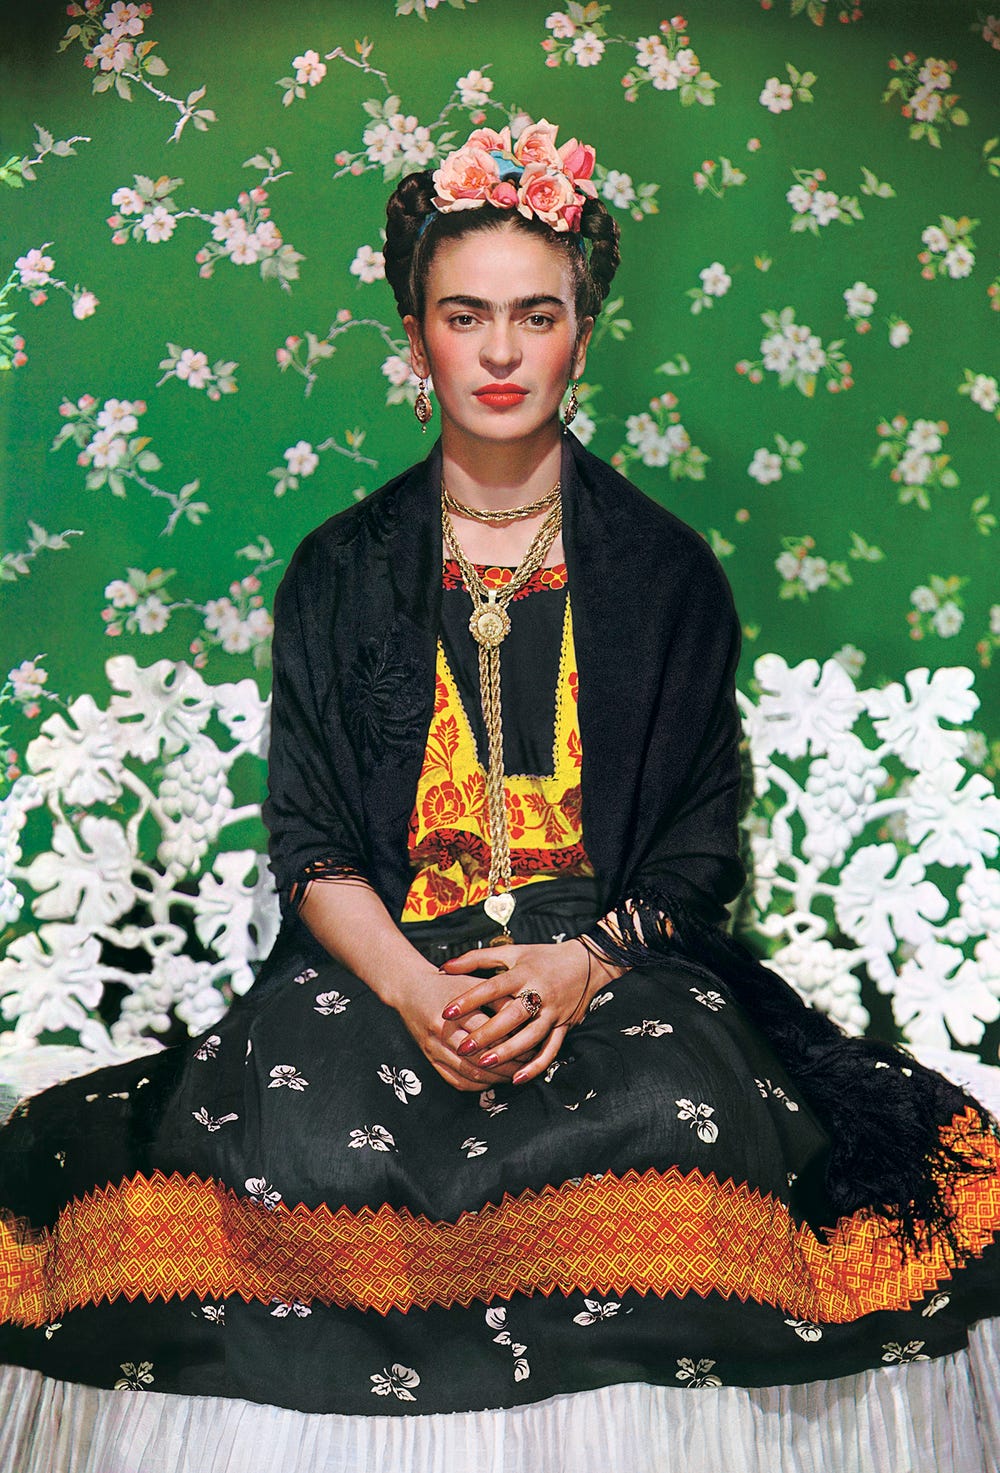 photo of a woman with dark hair and full eyebrows sitting on a white bench in front of a green floral background